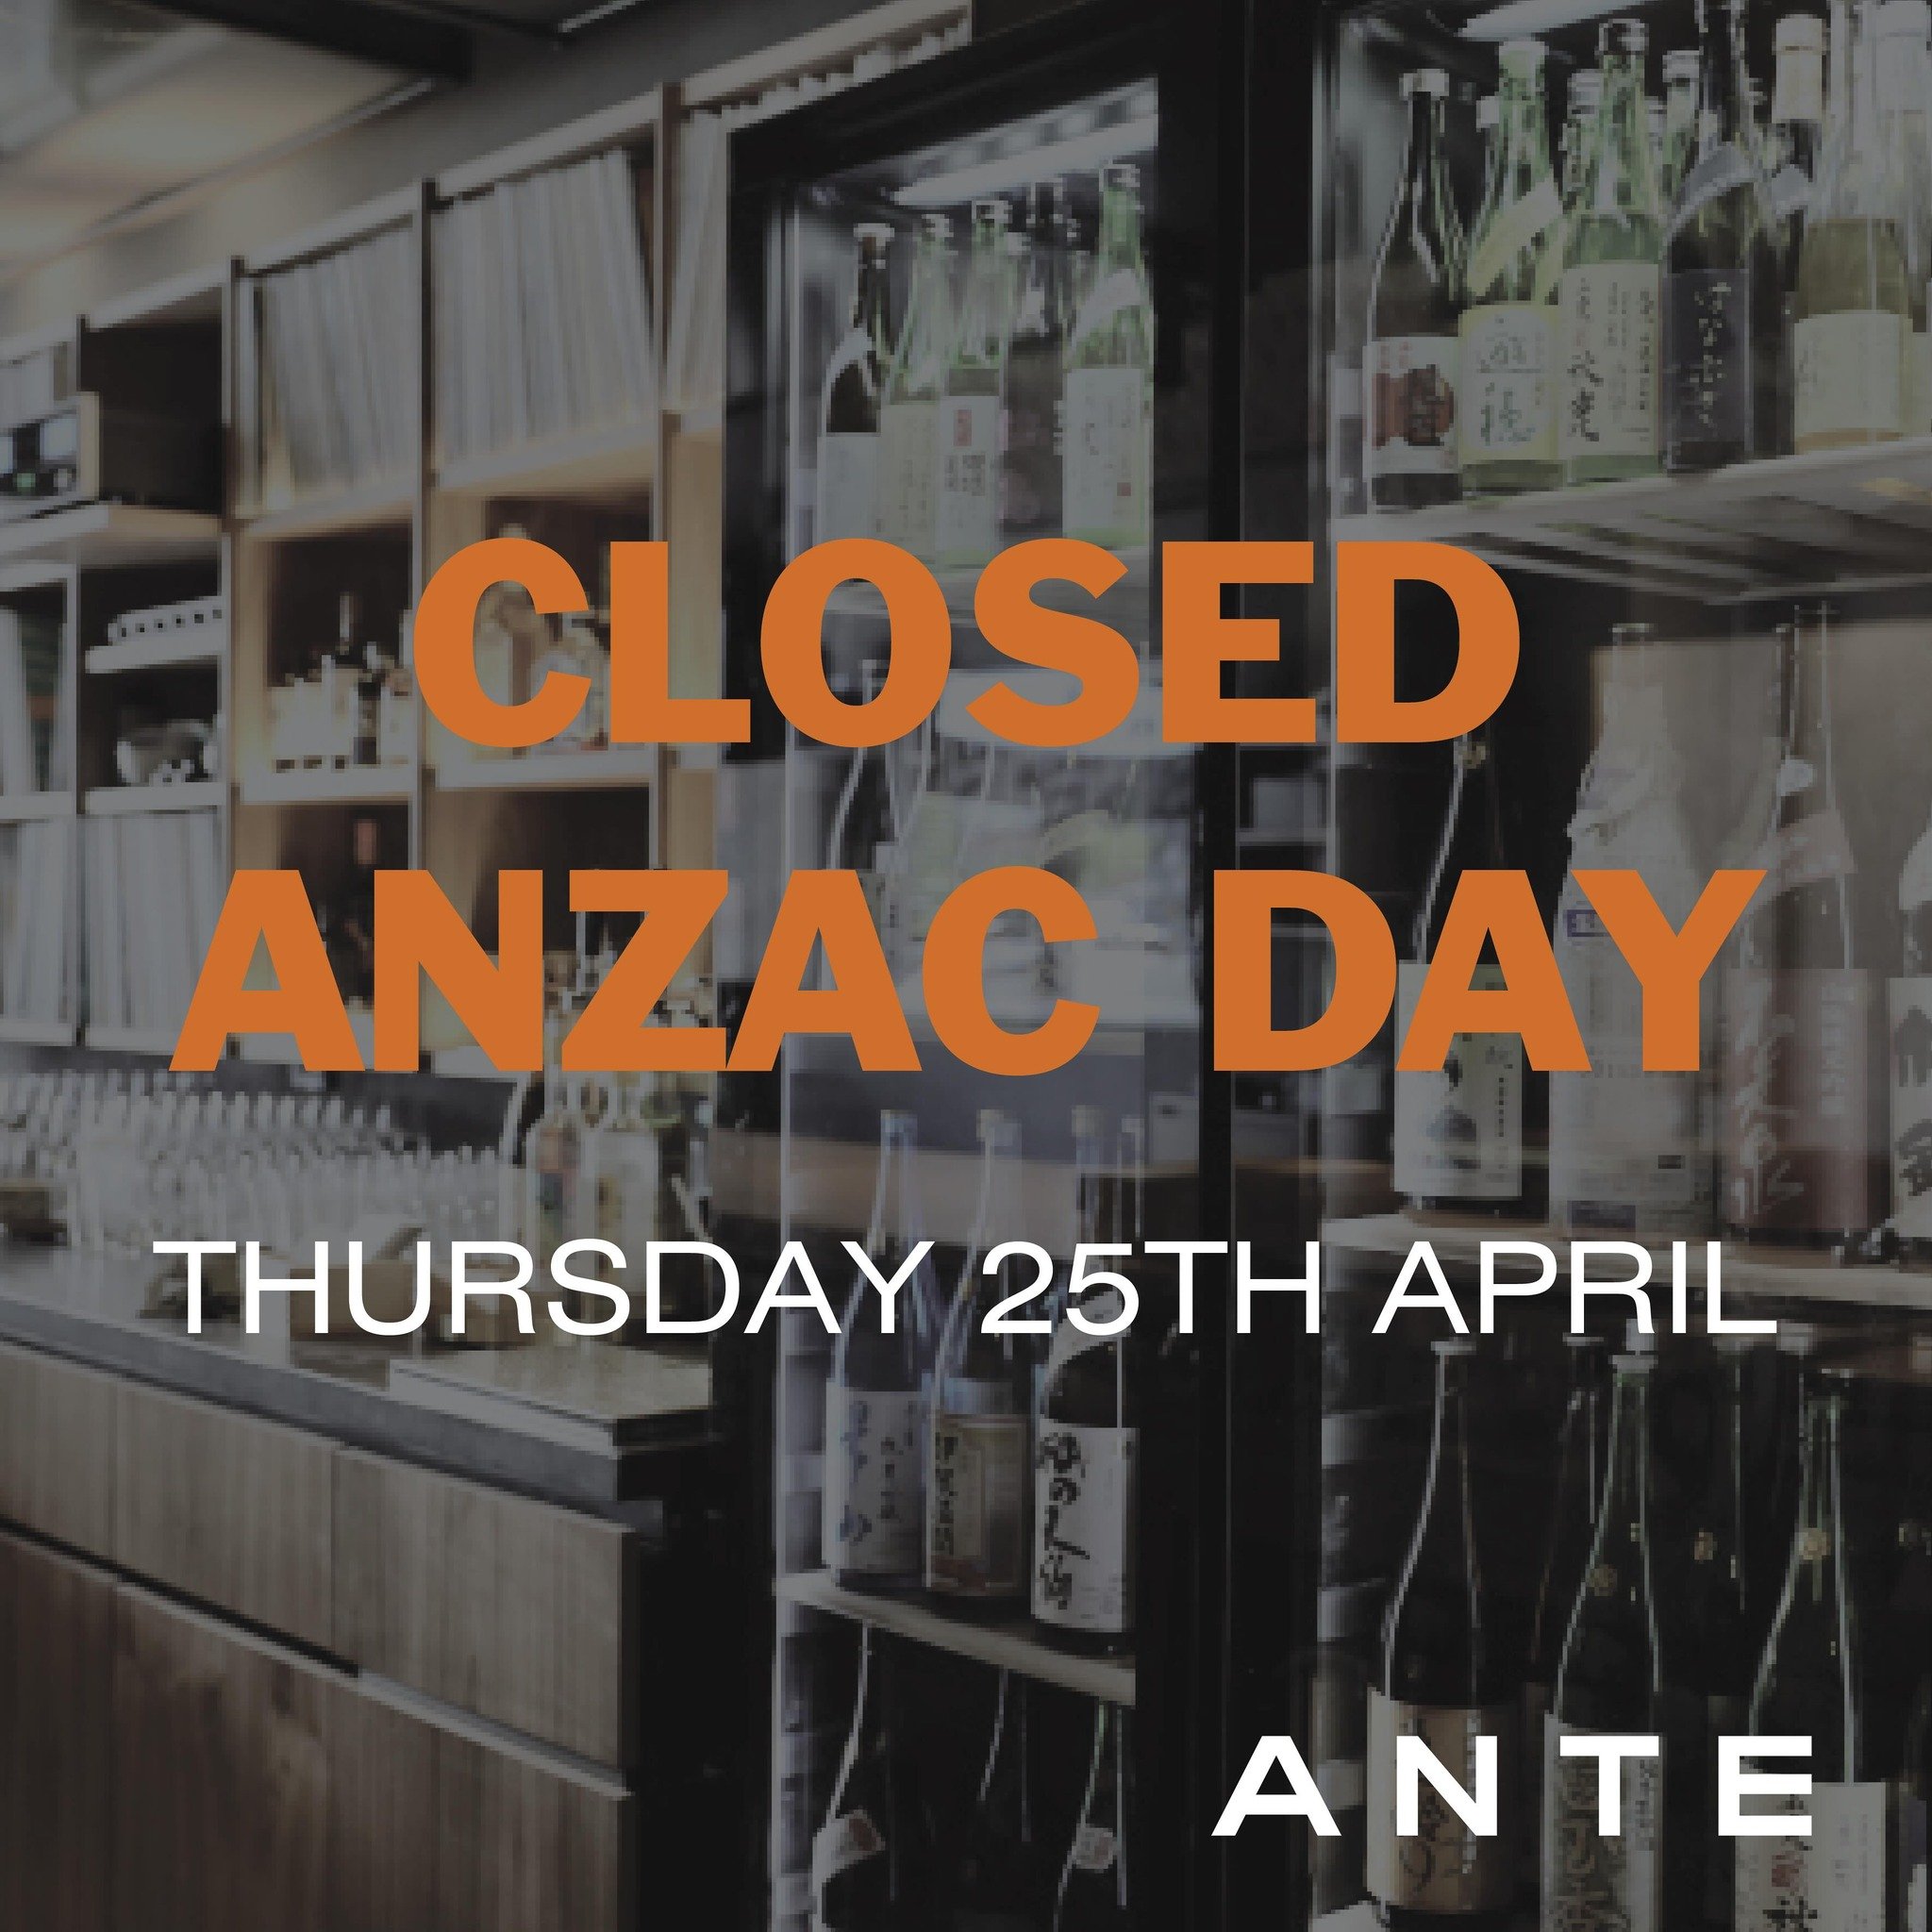 We&rsquo;re closed this Anzac Day - Thursday 25th. 

Open as usual the rest of the week:

Friday 5pm ~ late

Saturday 12pm ~ late

Sunday 12pm ~ late. 

See you soon! 

#antesyd #sakebar